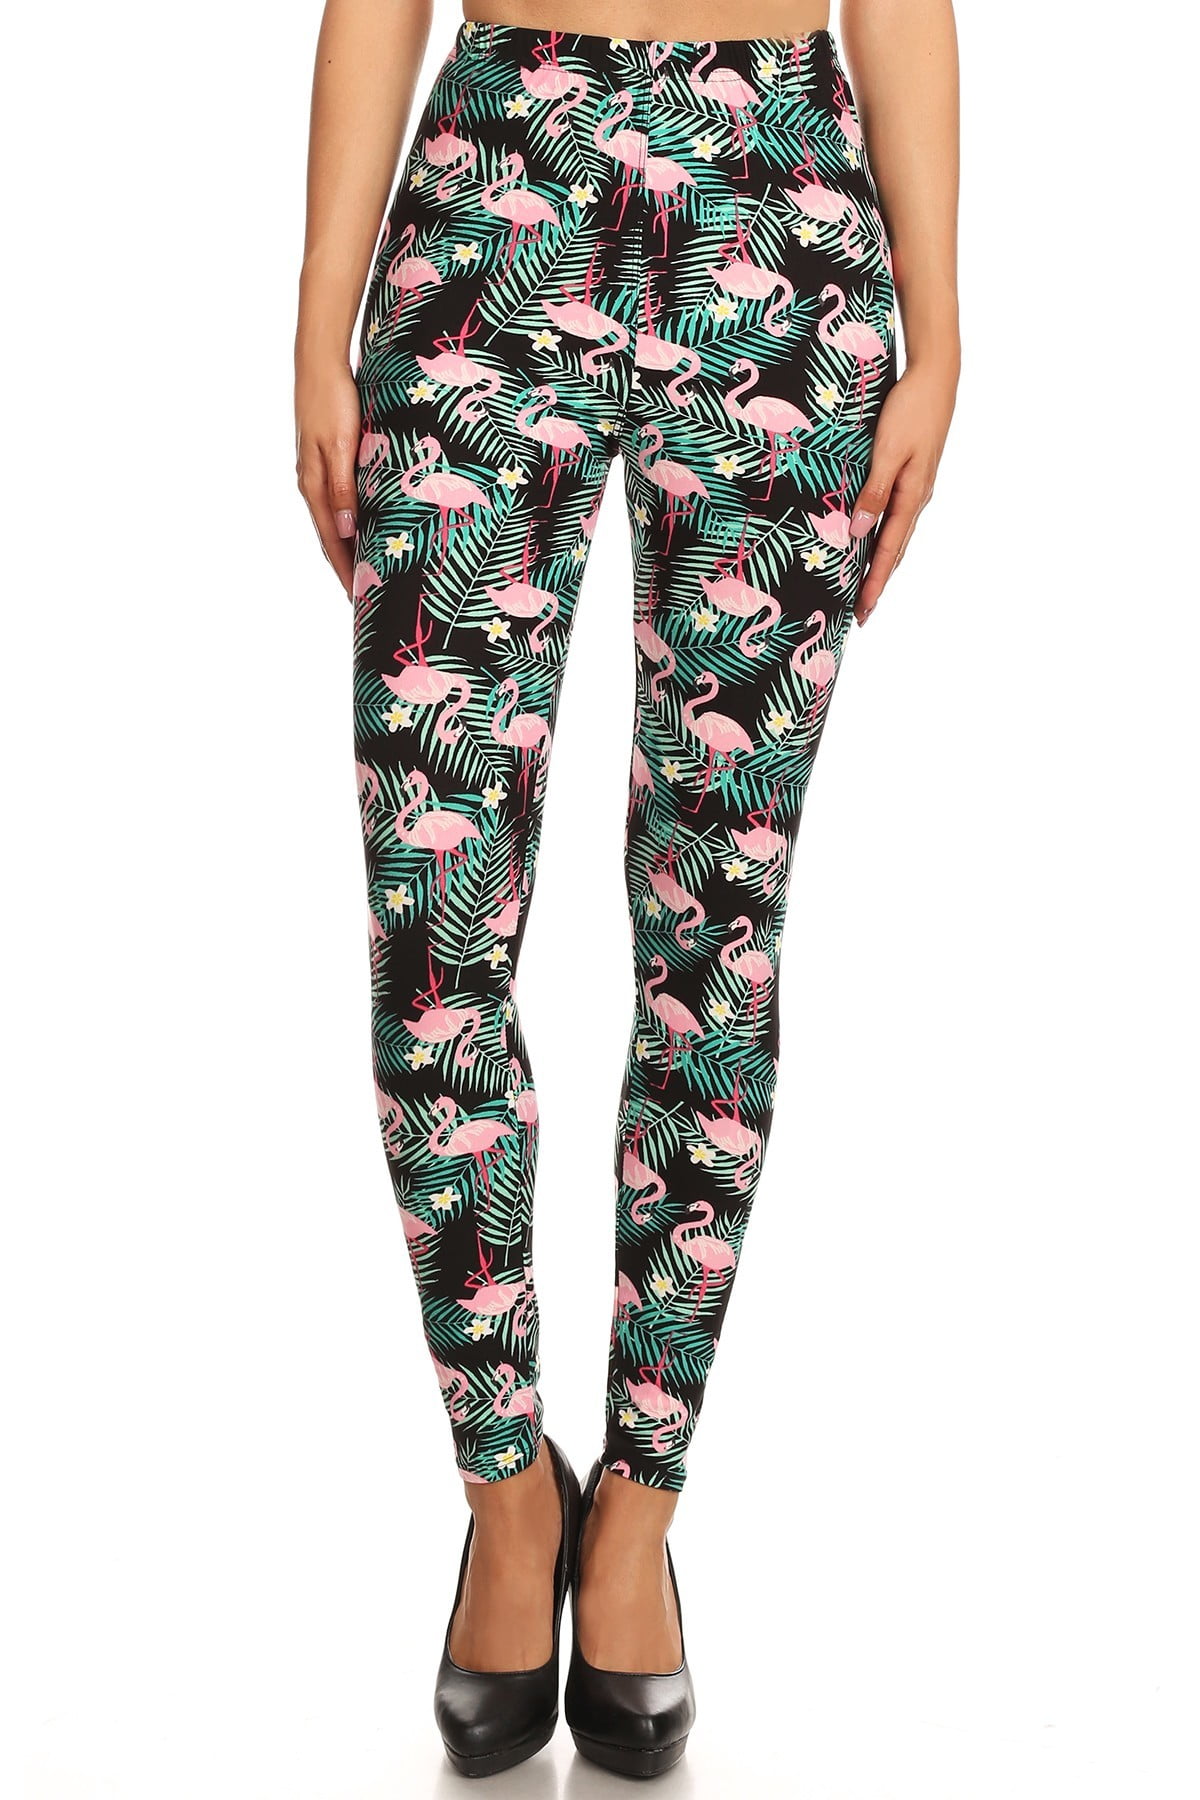 Flamingo Nux Patterned Leggings Size M - $28 - From Madi